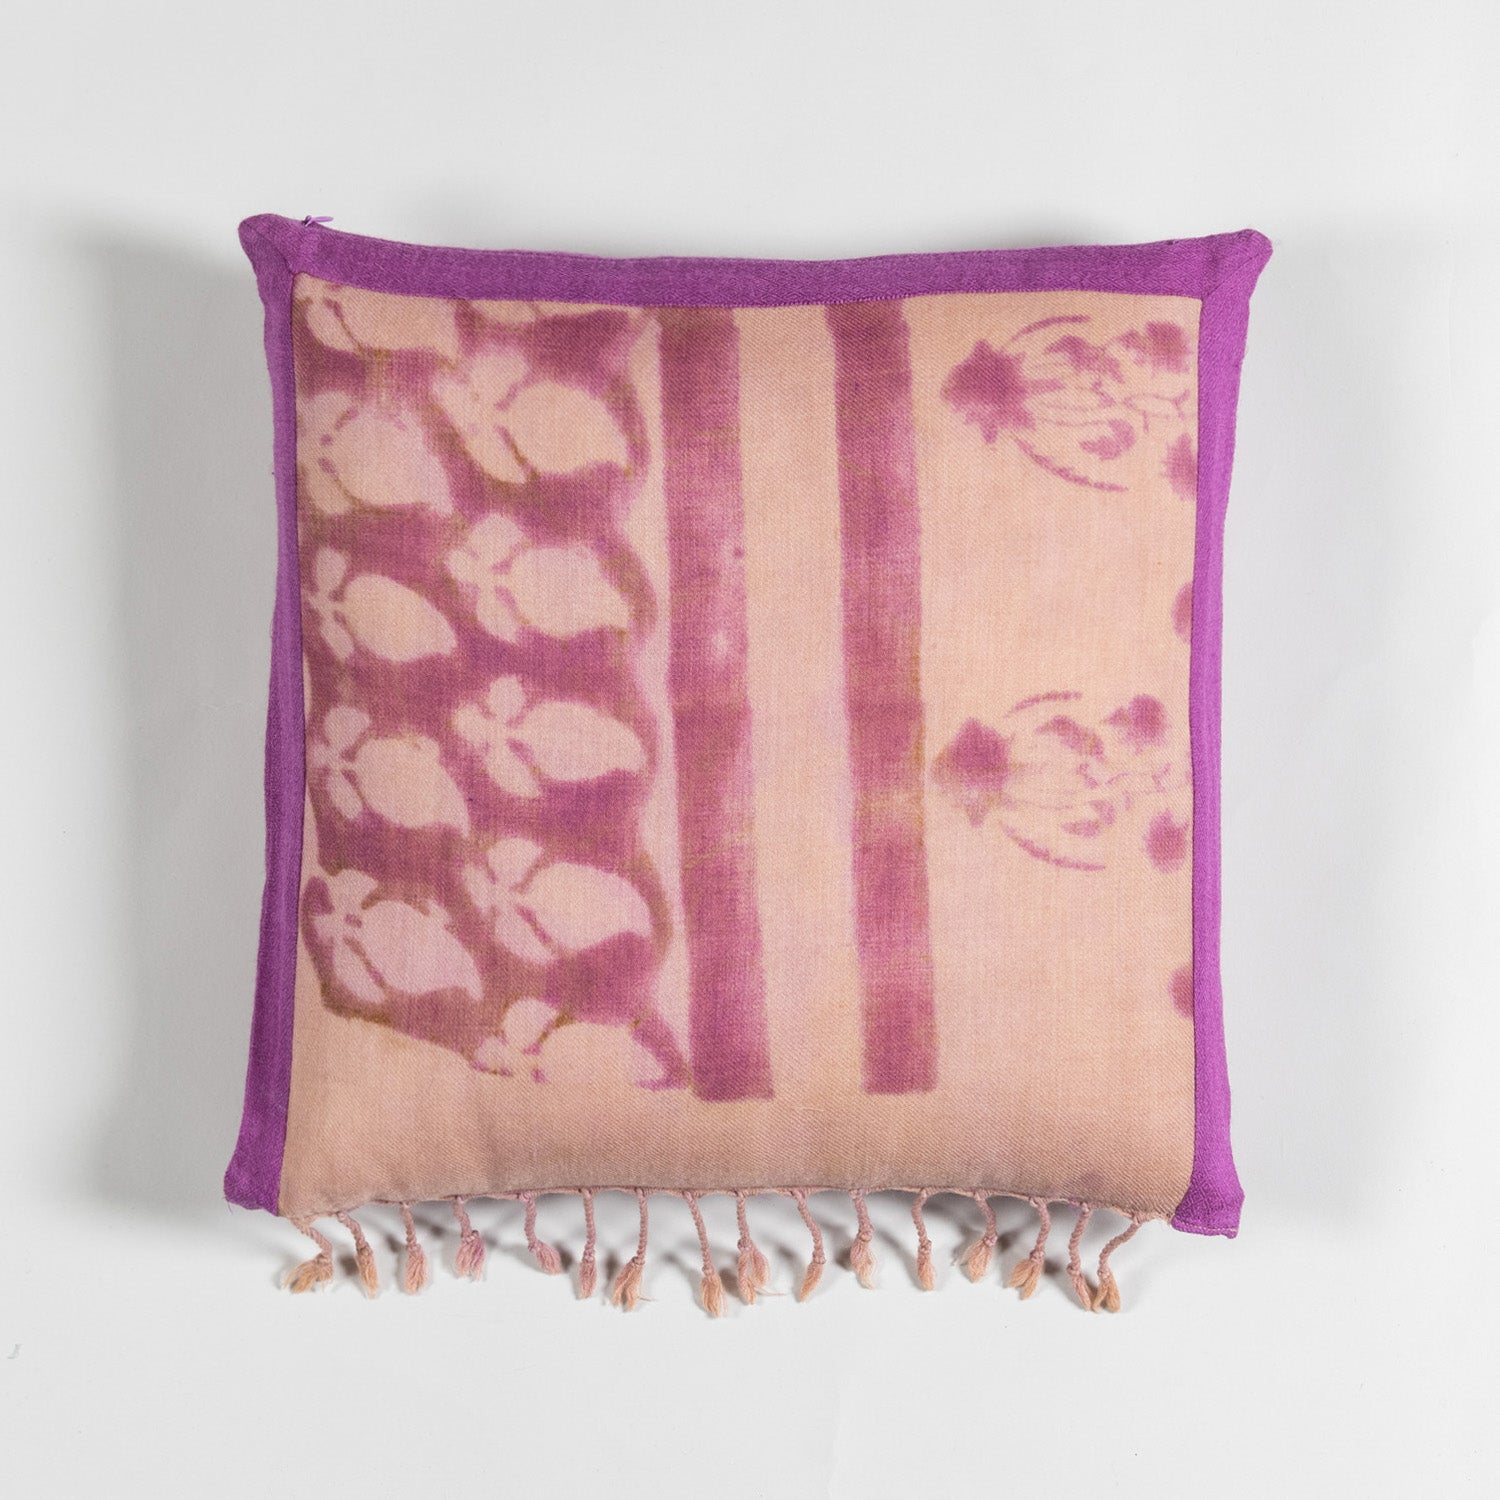 Handwoven Upcycled Purple & Lilac Wool Cushion Cover - 16x16